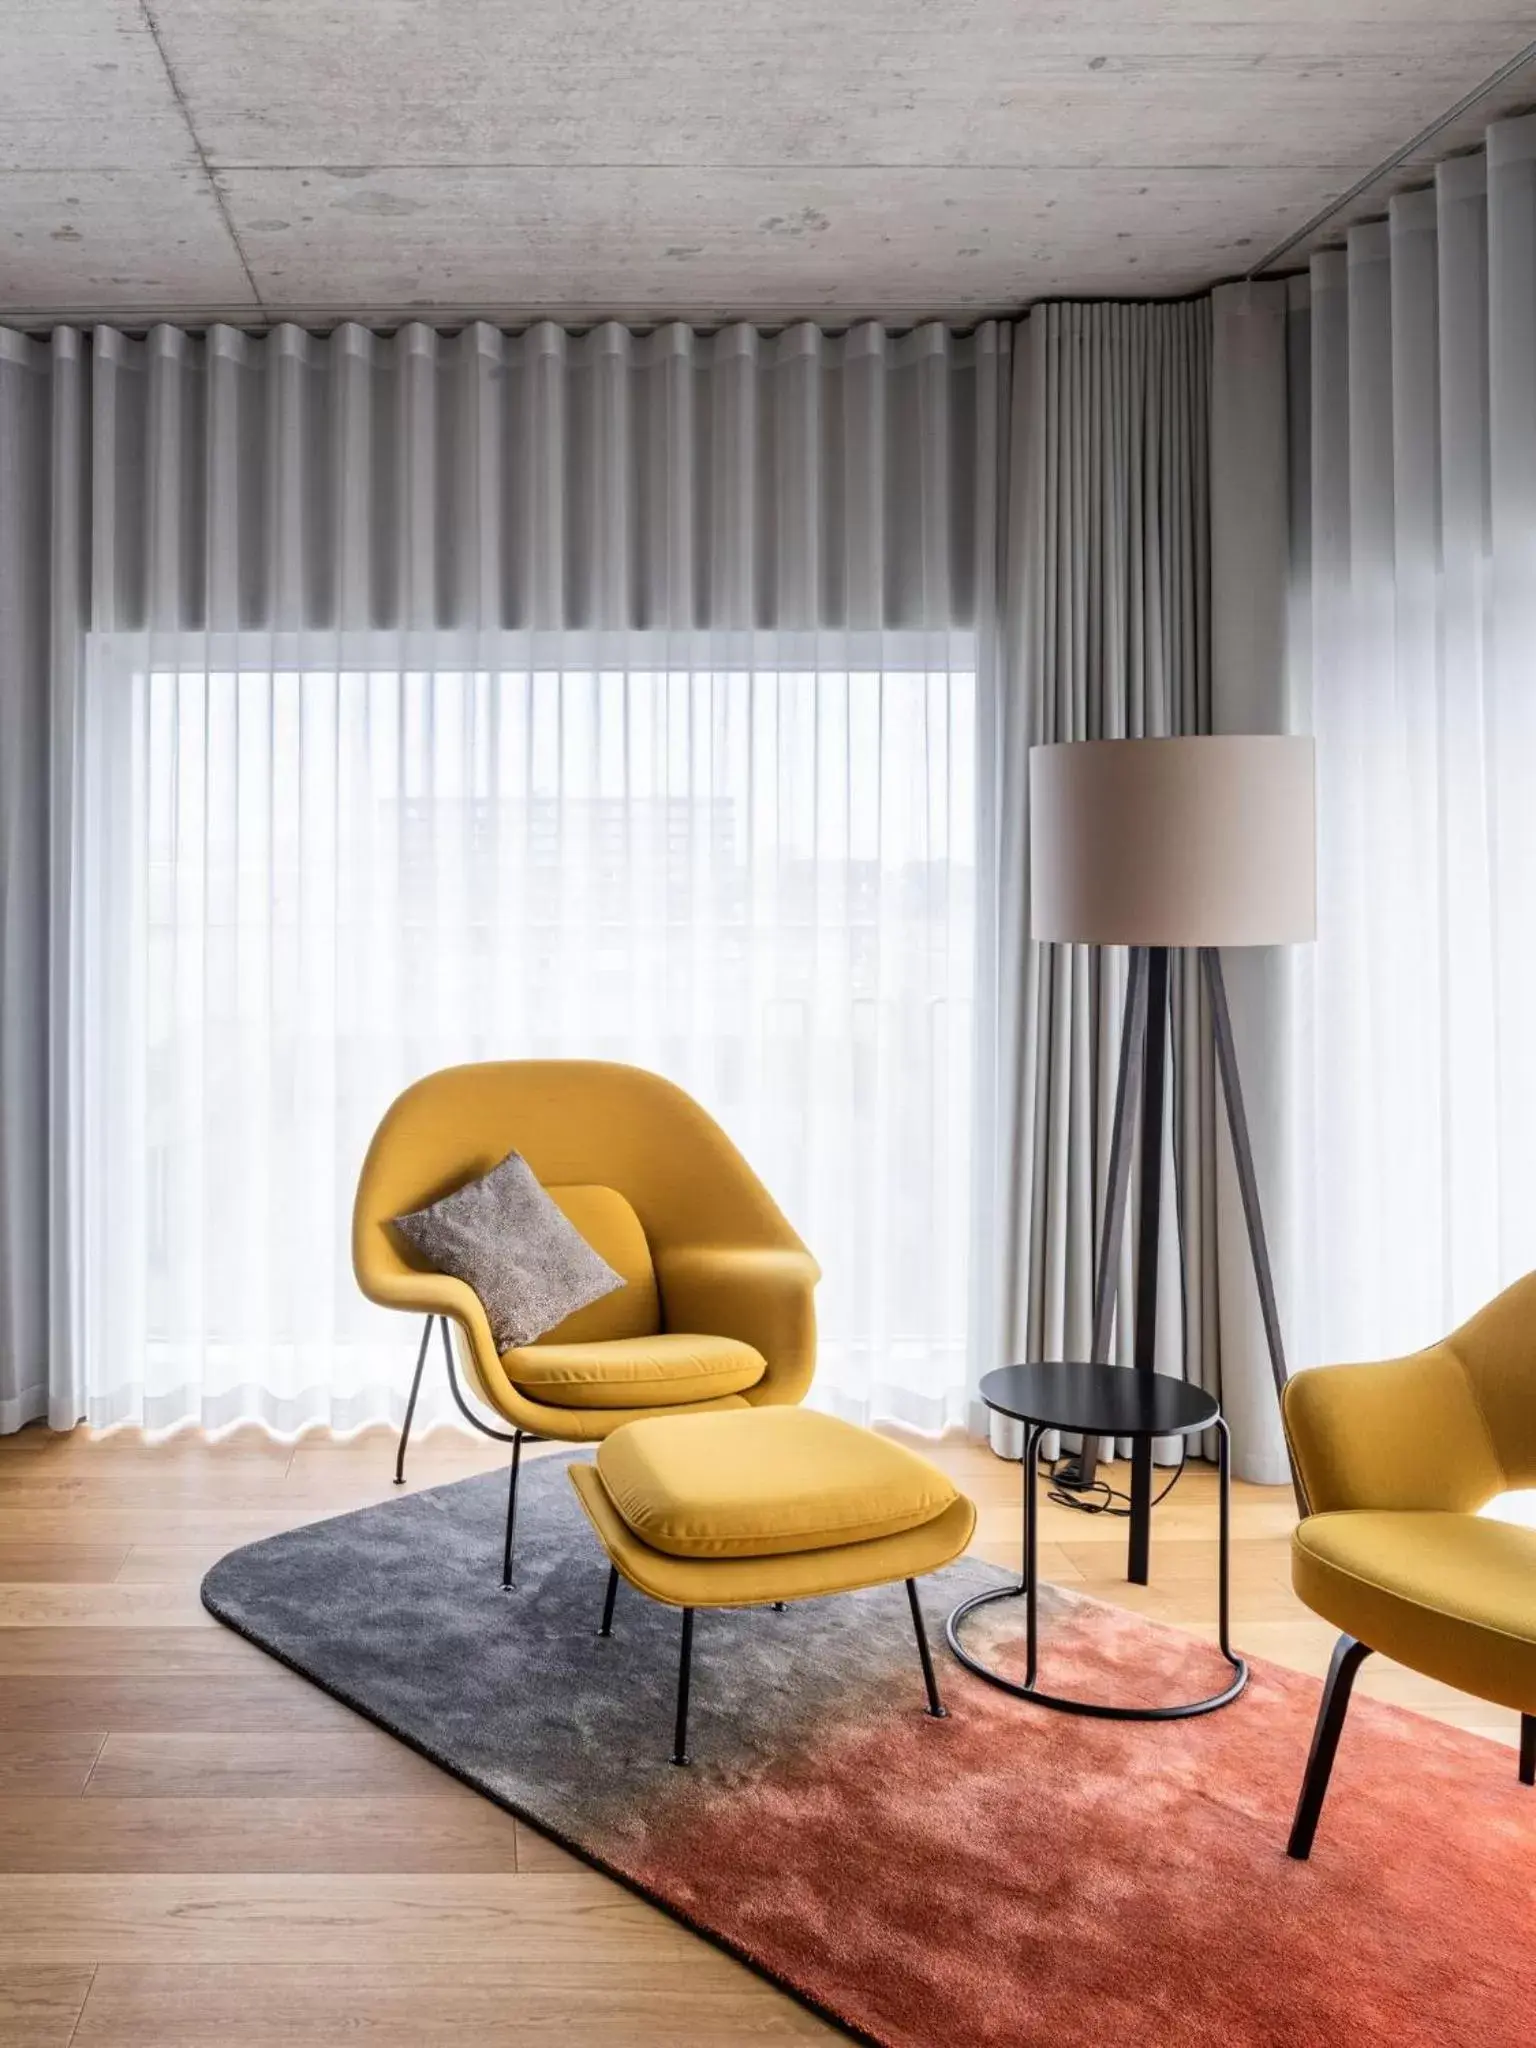 Seating Area in Placid Hotel Design & Lifestyle Zurich